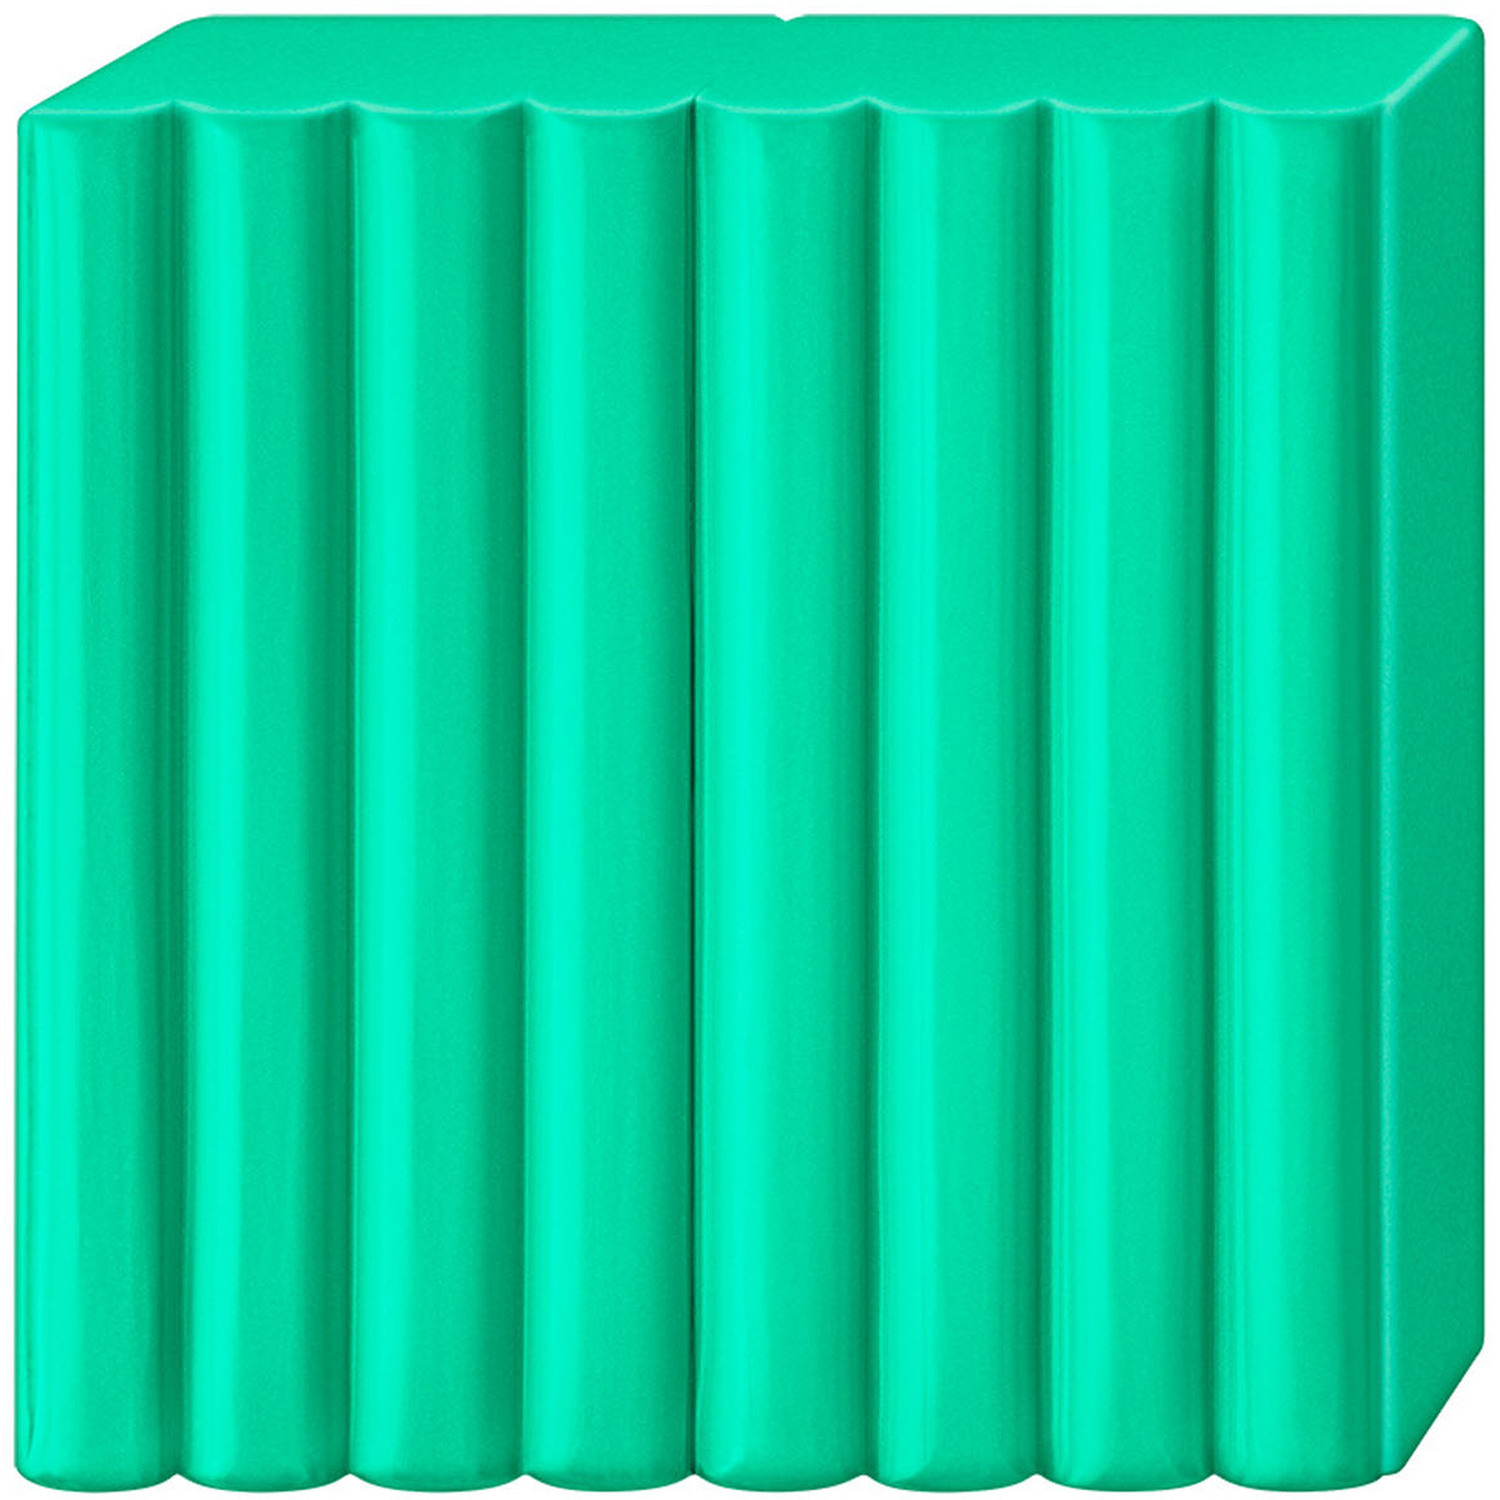 Staedtler FIMO Effect Modelling Clay Block - Translucent Green Image 2